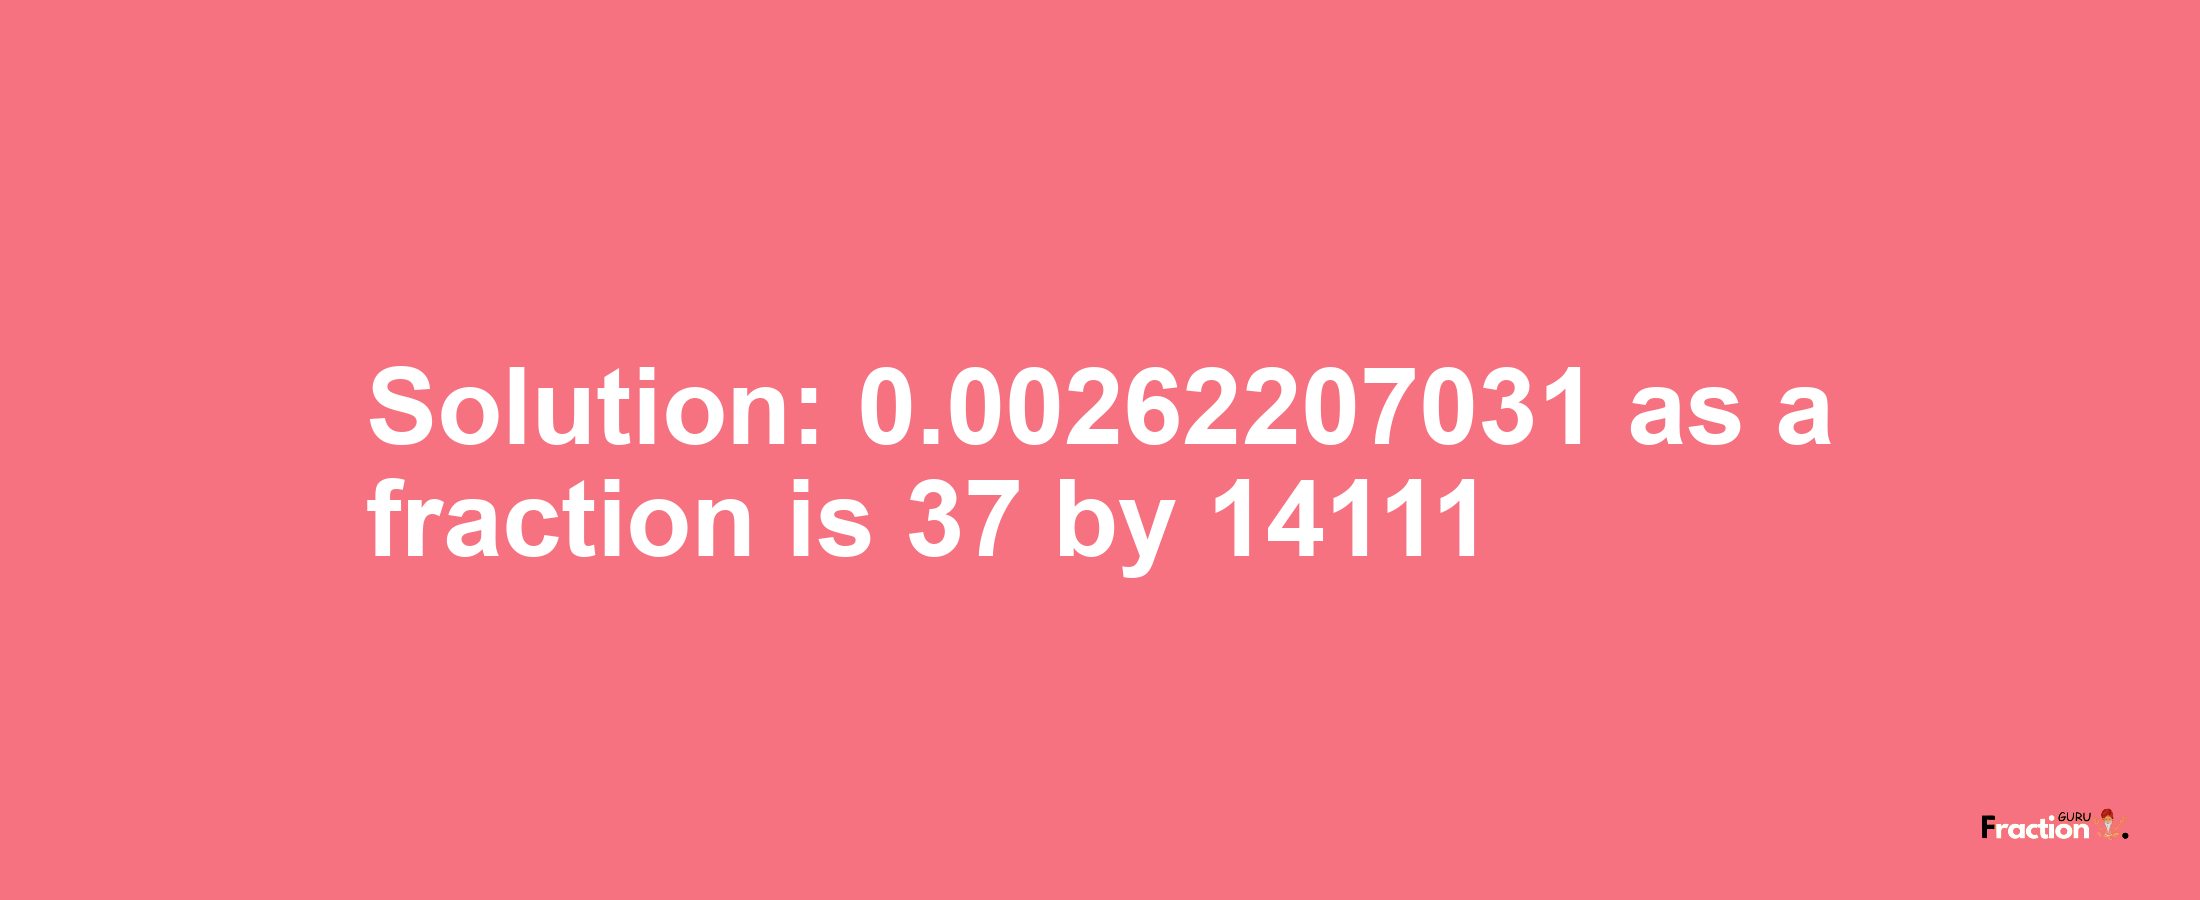 Solution:0.00262207031 as a fraction is 37/14111